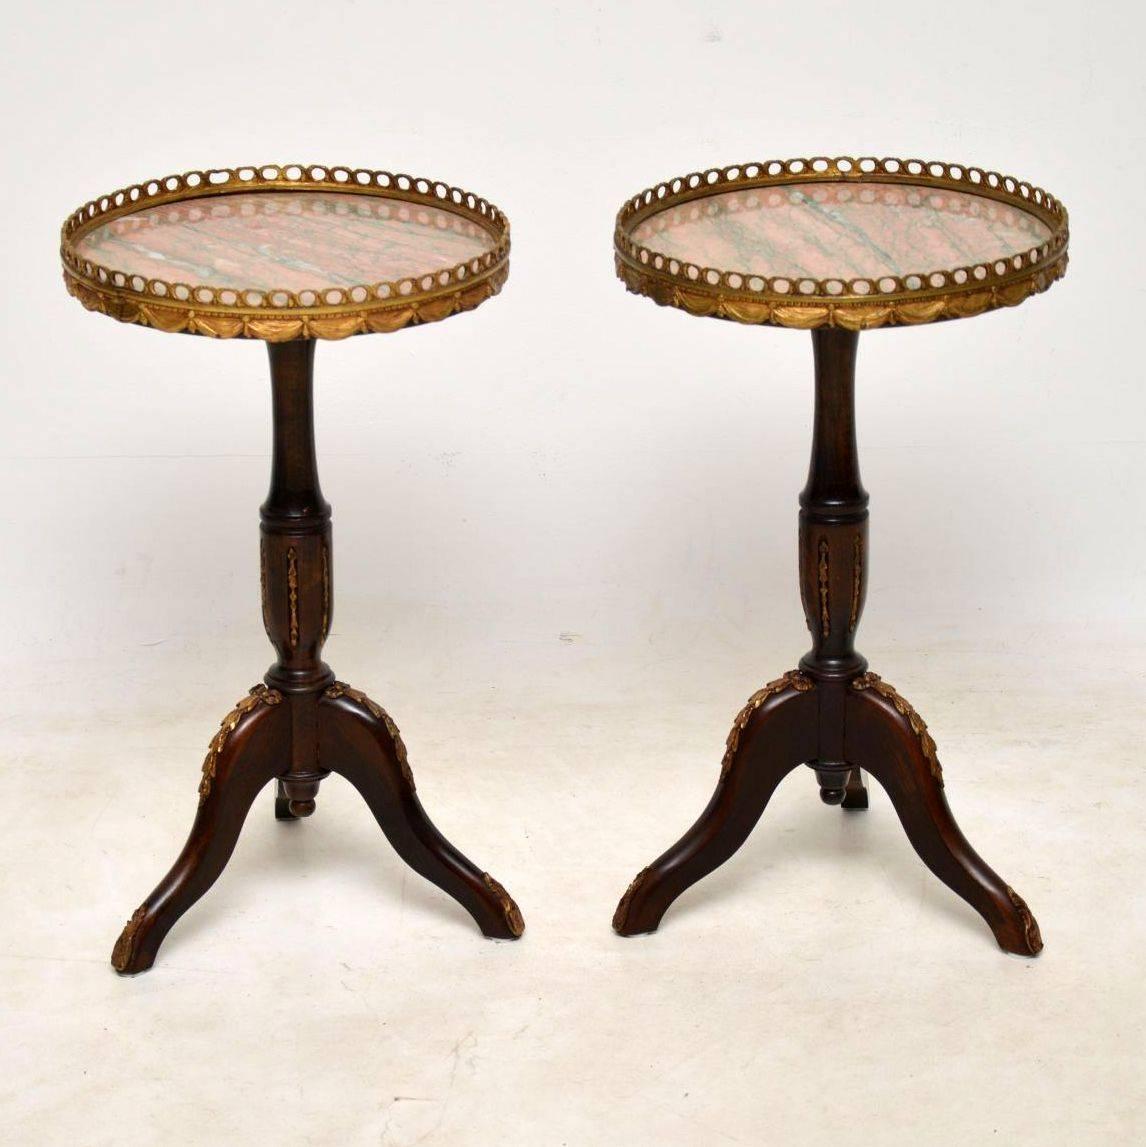 Pair of antique French marble-top wine tables in good condition, having just been polished and dating from circa 1930s period. The tops are matching marble and surrounded by gilt bronze pierced galleries with swags below. They sit on turned mahogany